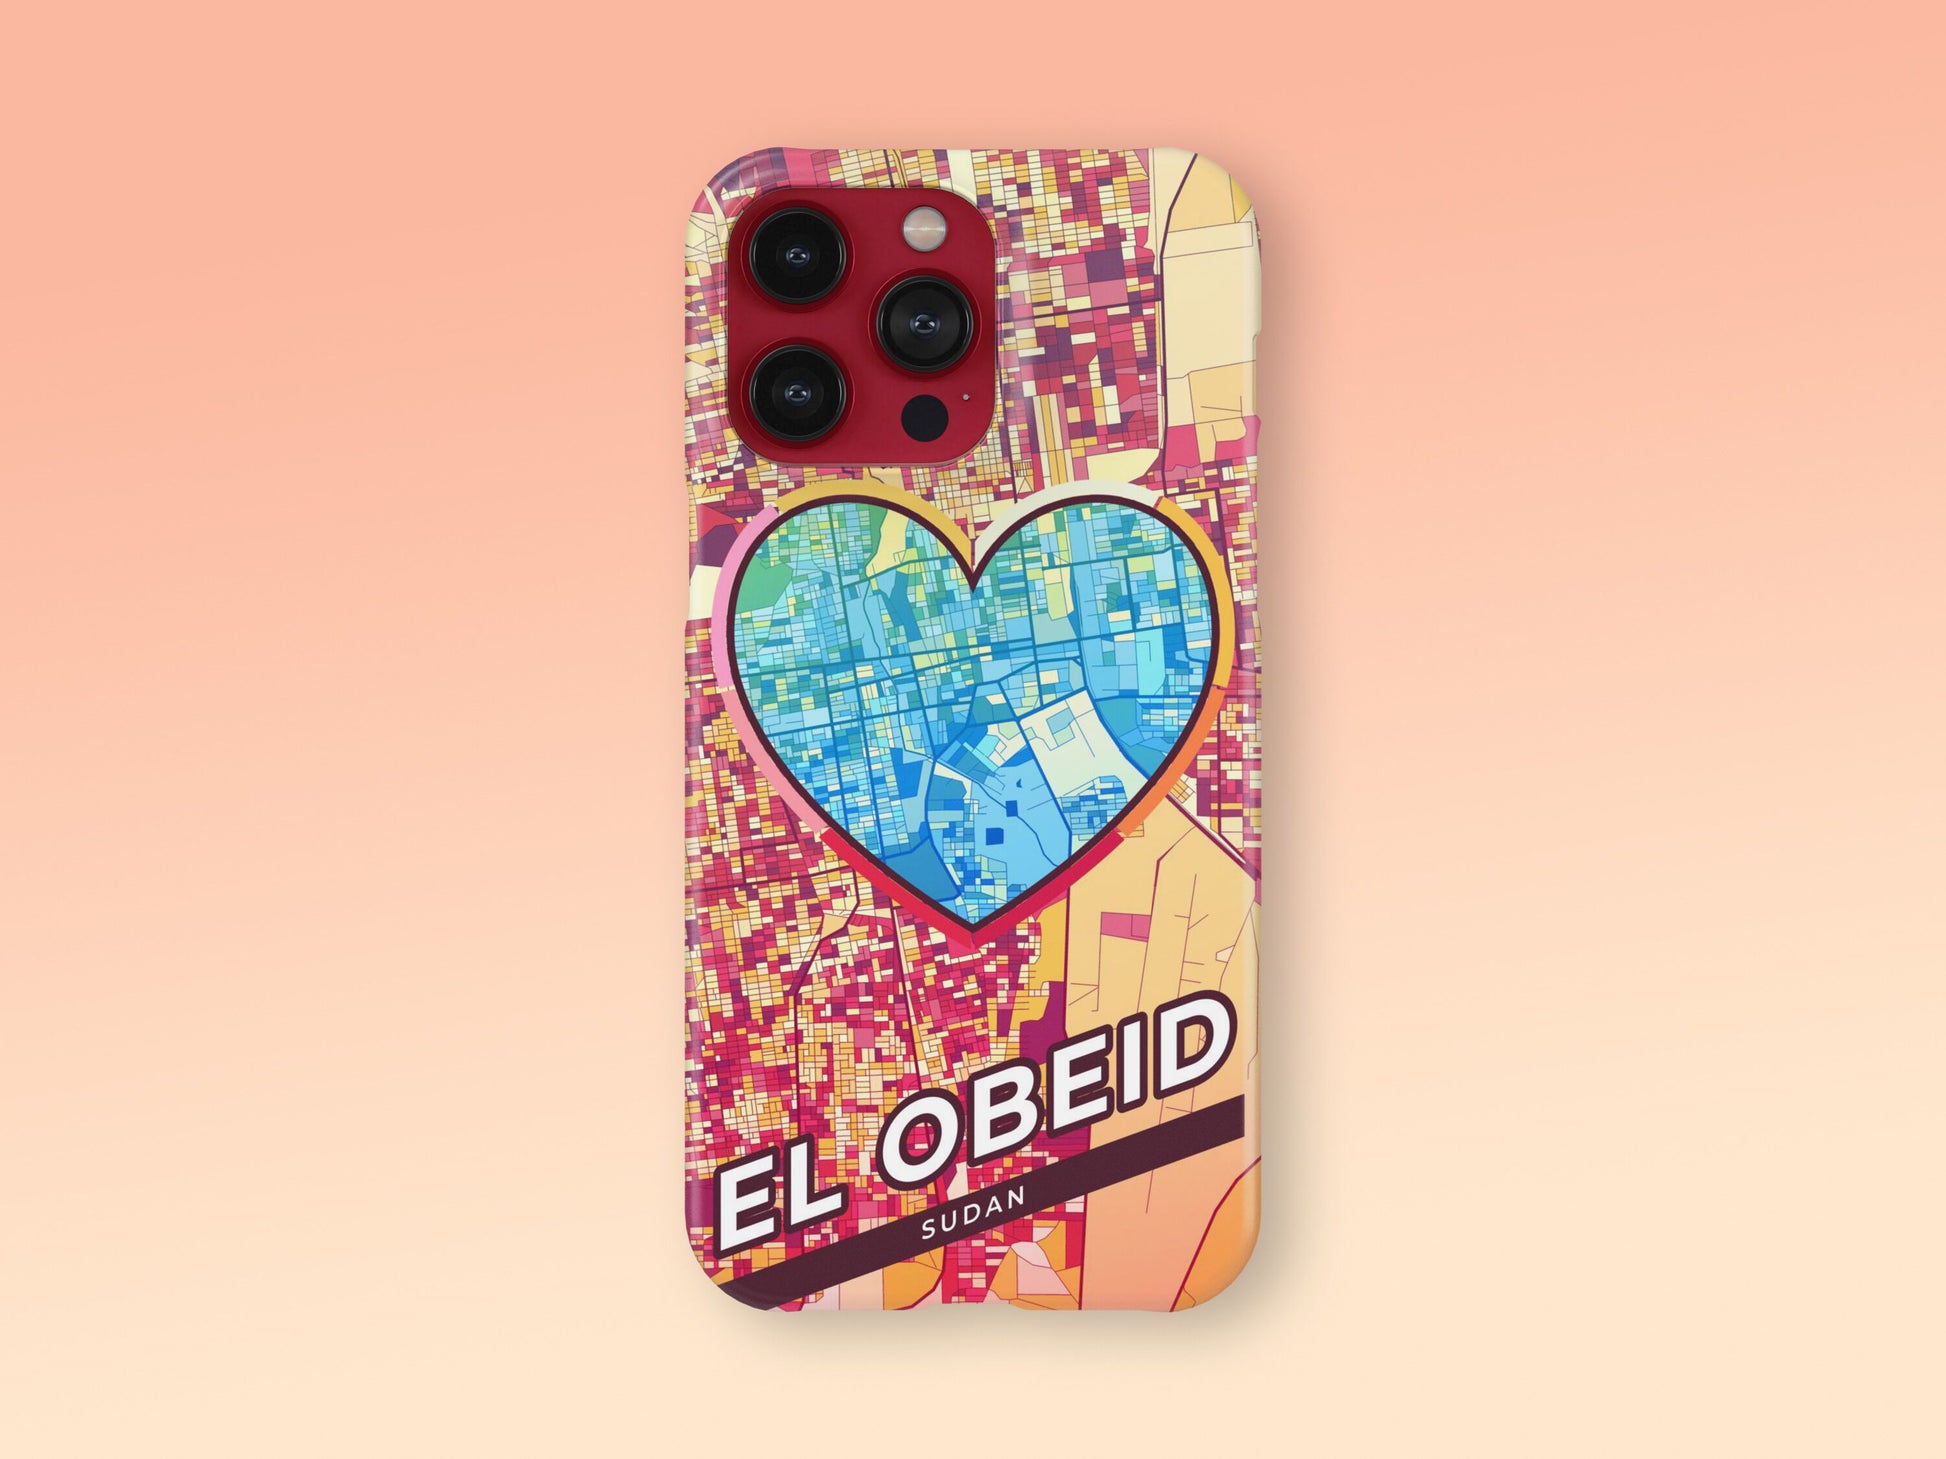 El Obeid Sudan slim phone case with colorful icon. Birthday, wedding or housewarming gift. Couple match cases. 2